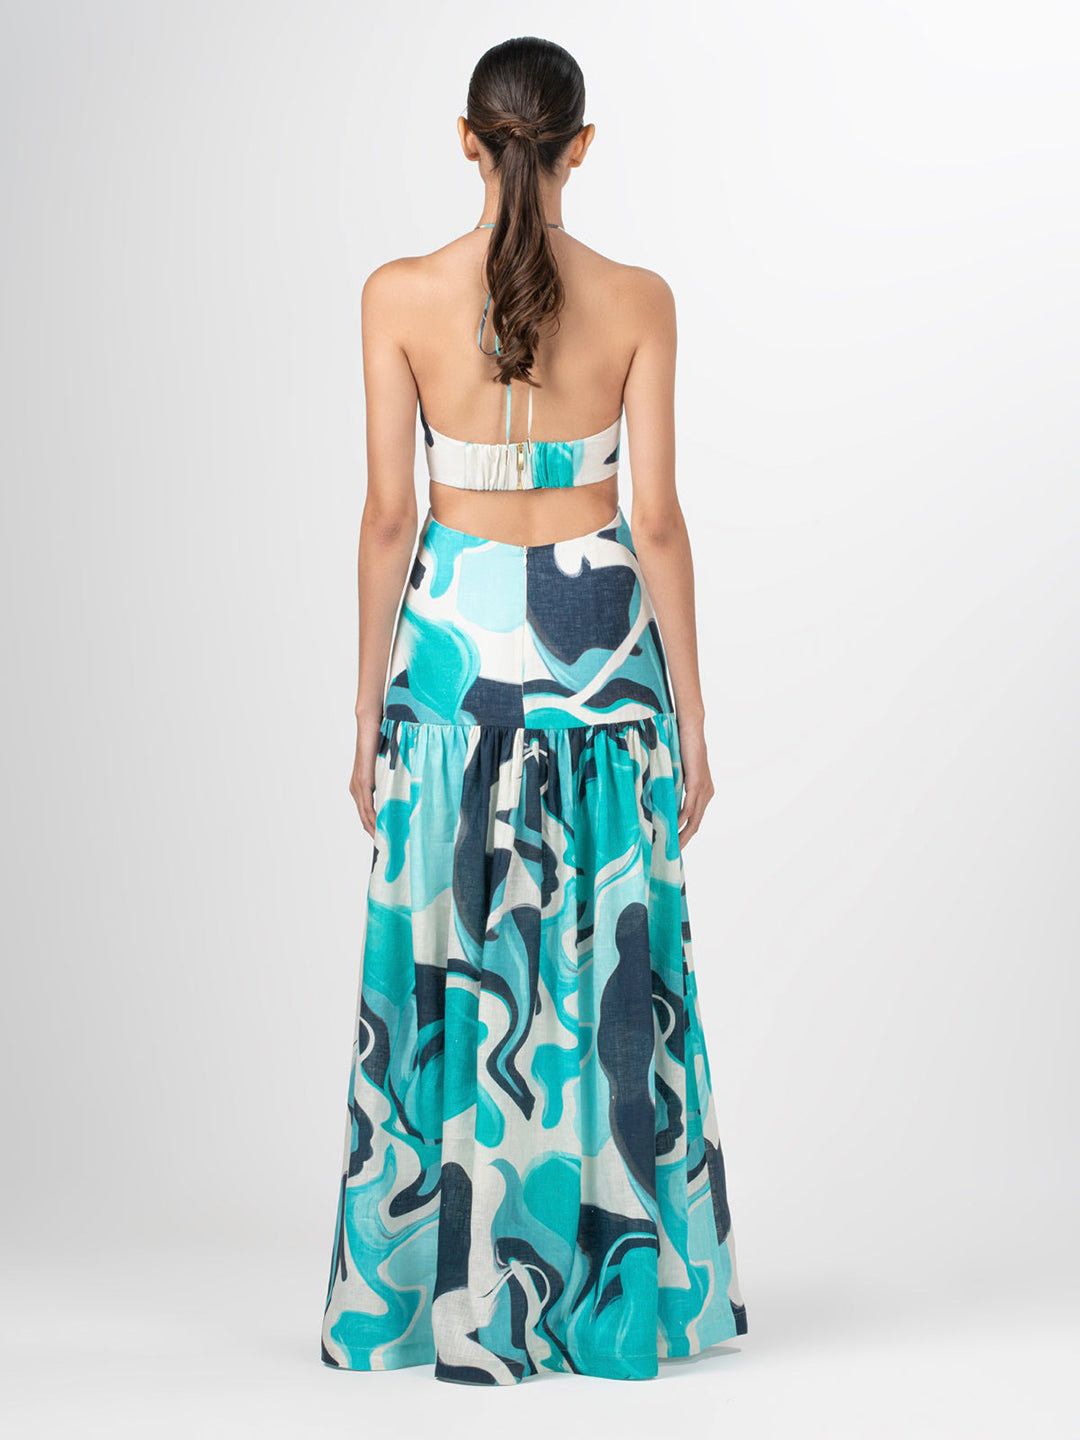 ROSALIA DRESS IN TURQUOISE MARBLE